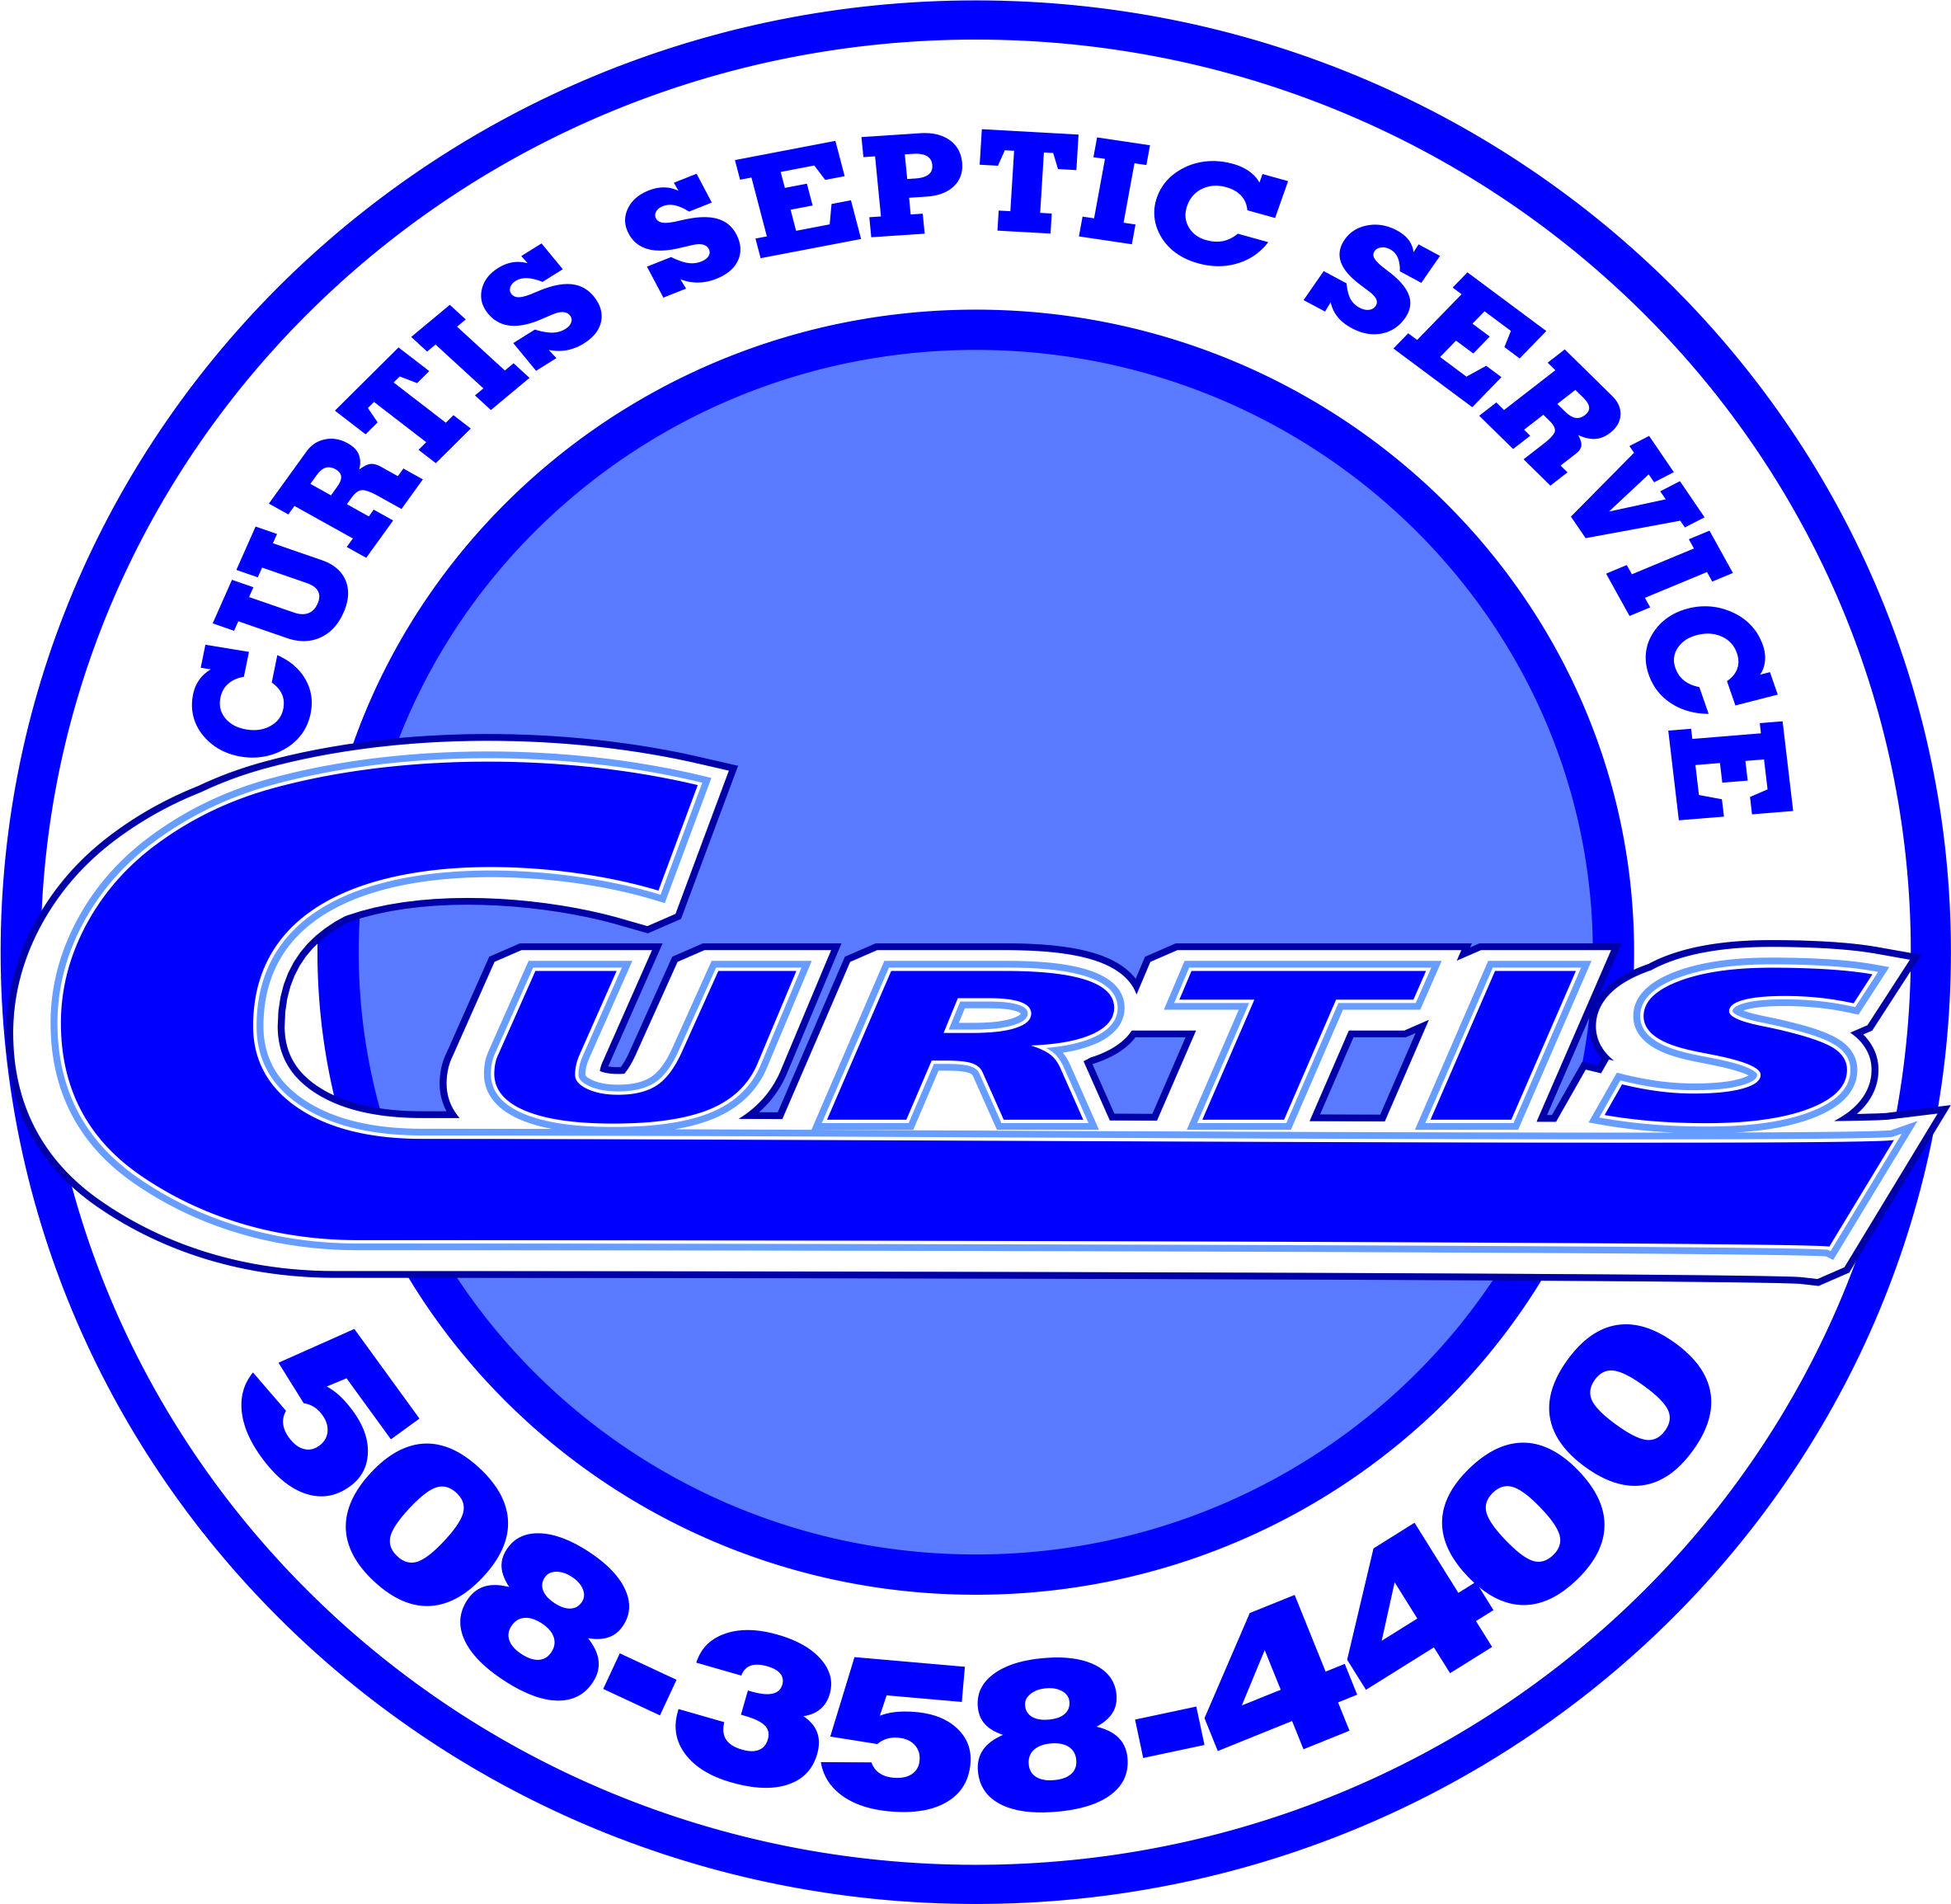 Septic system inspectors in Hopedale, MA.